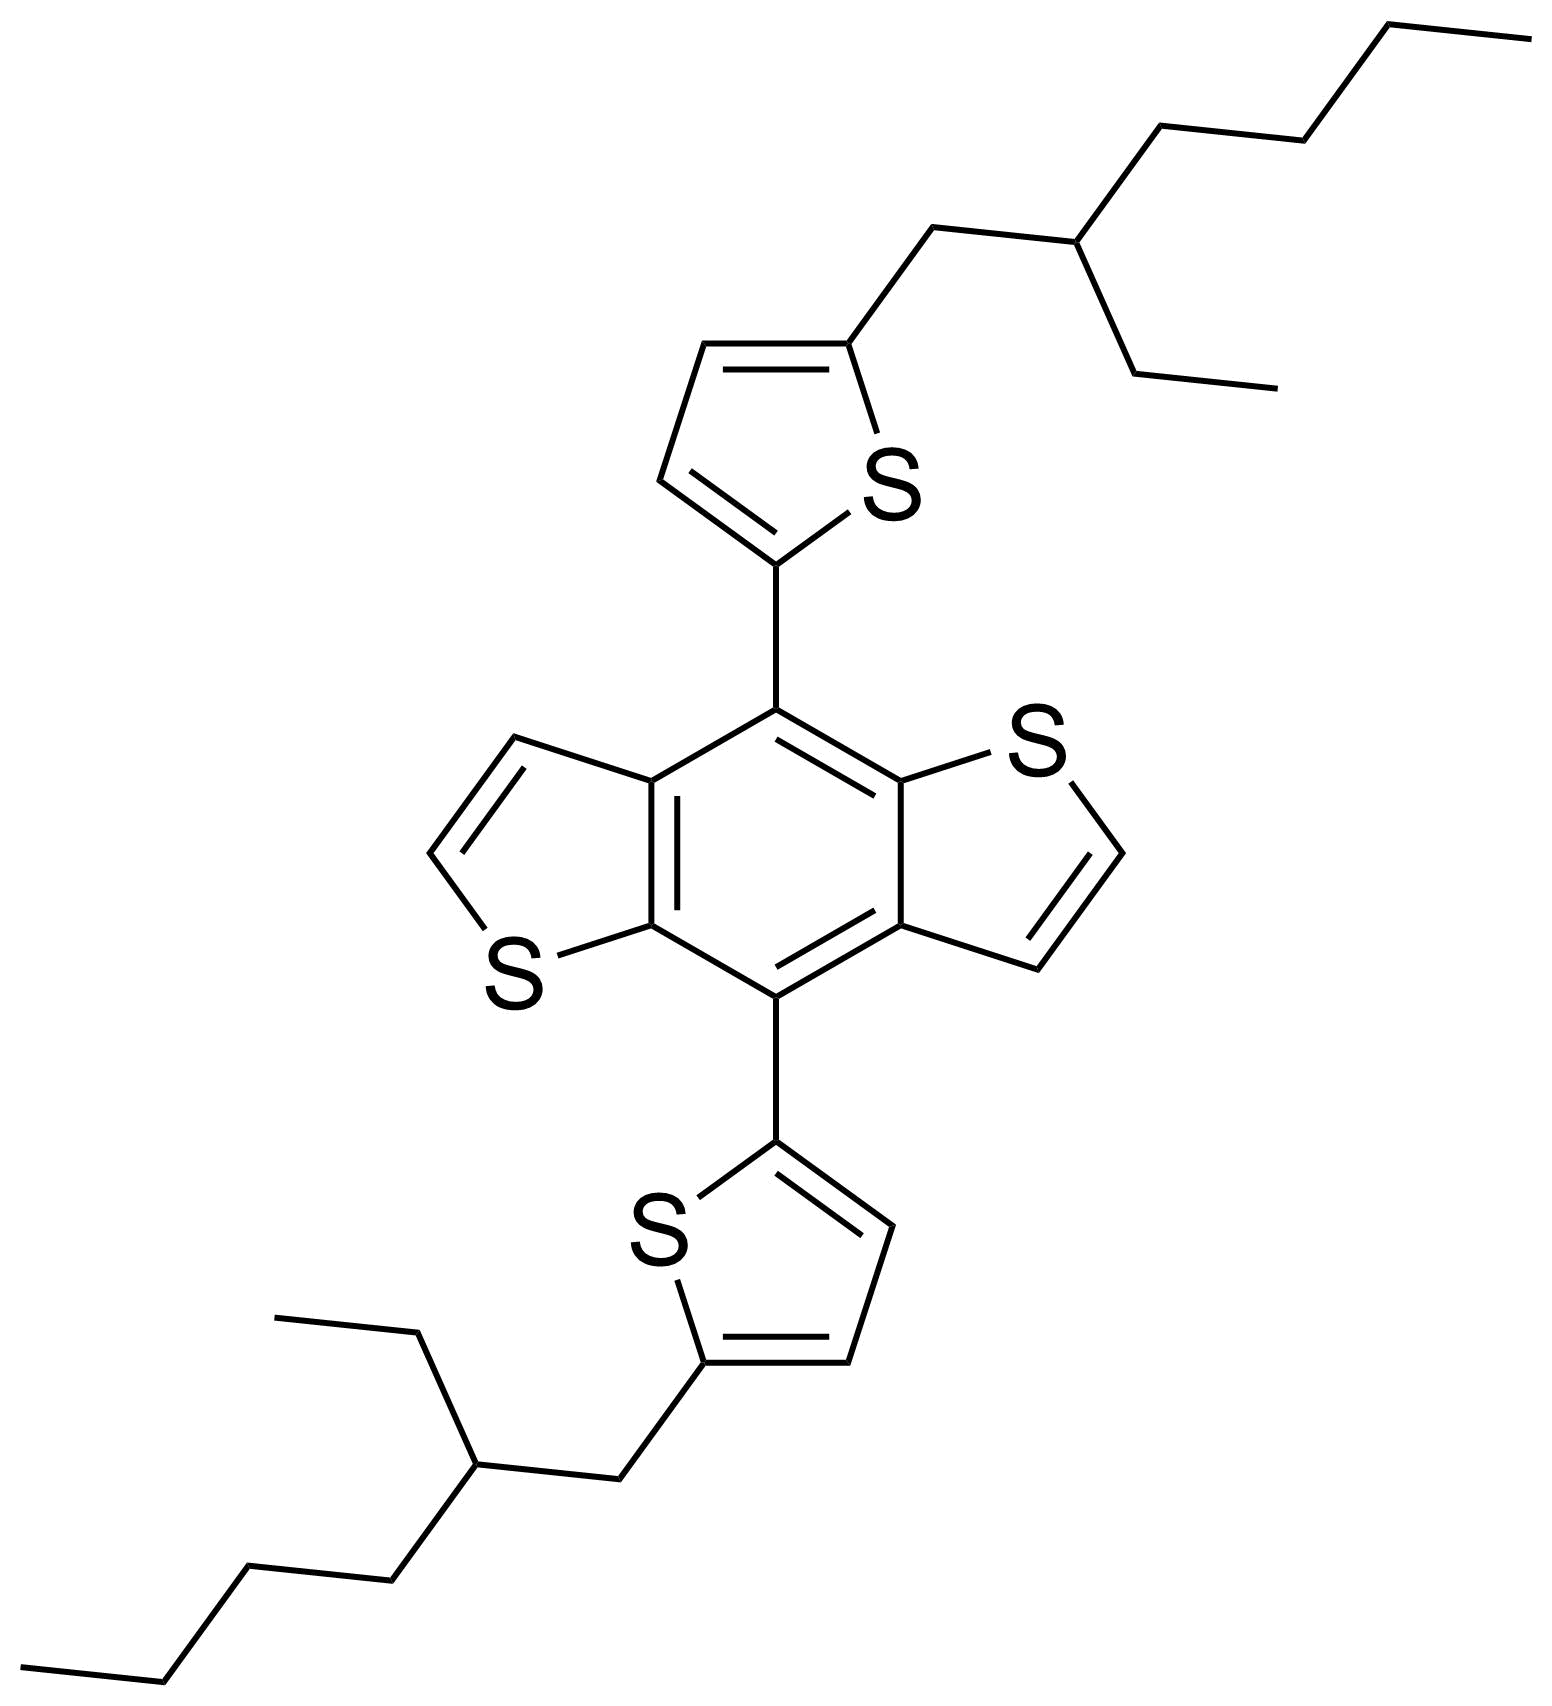 Structure of 4,8-Bis(5-(2-ethylhexyl)thiophen-2-yl)benzo[1,2-b-4,5-b']dithiophene